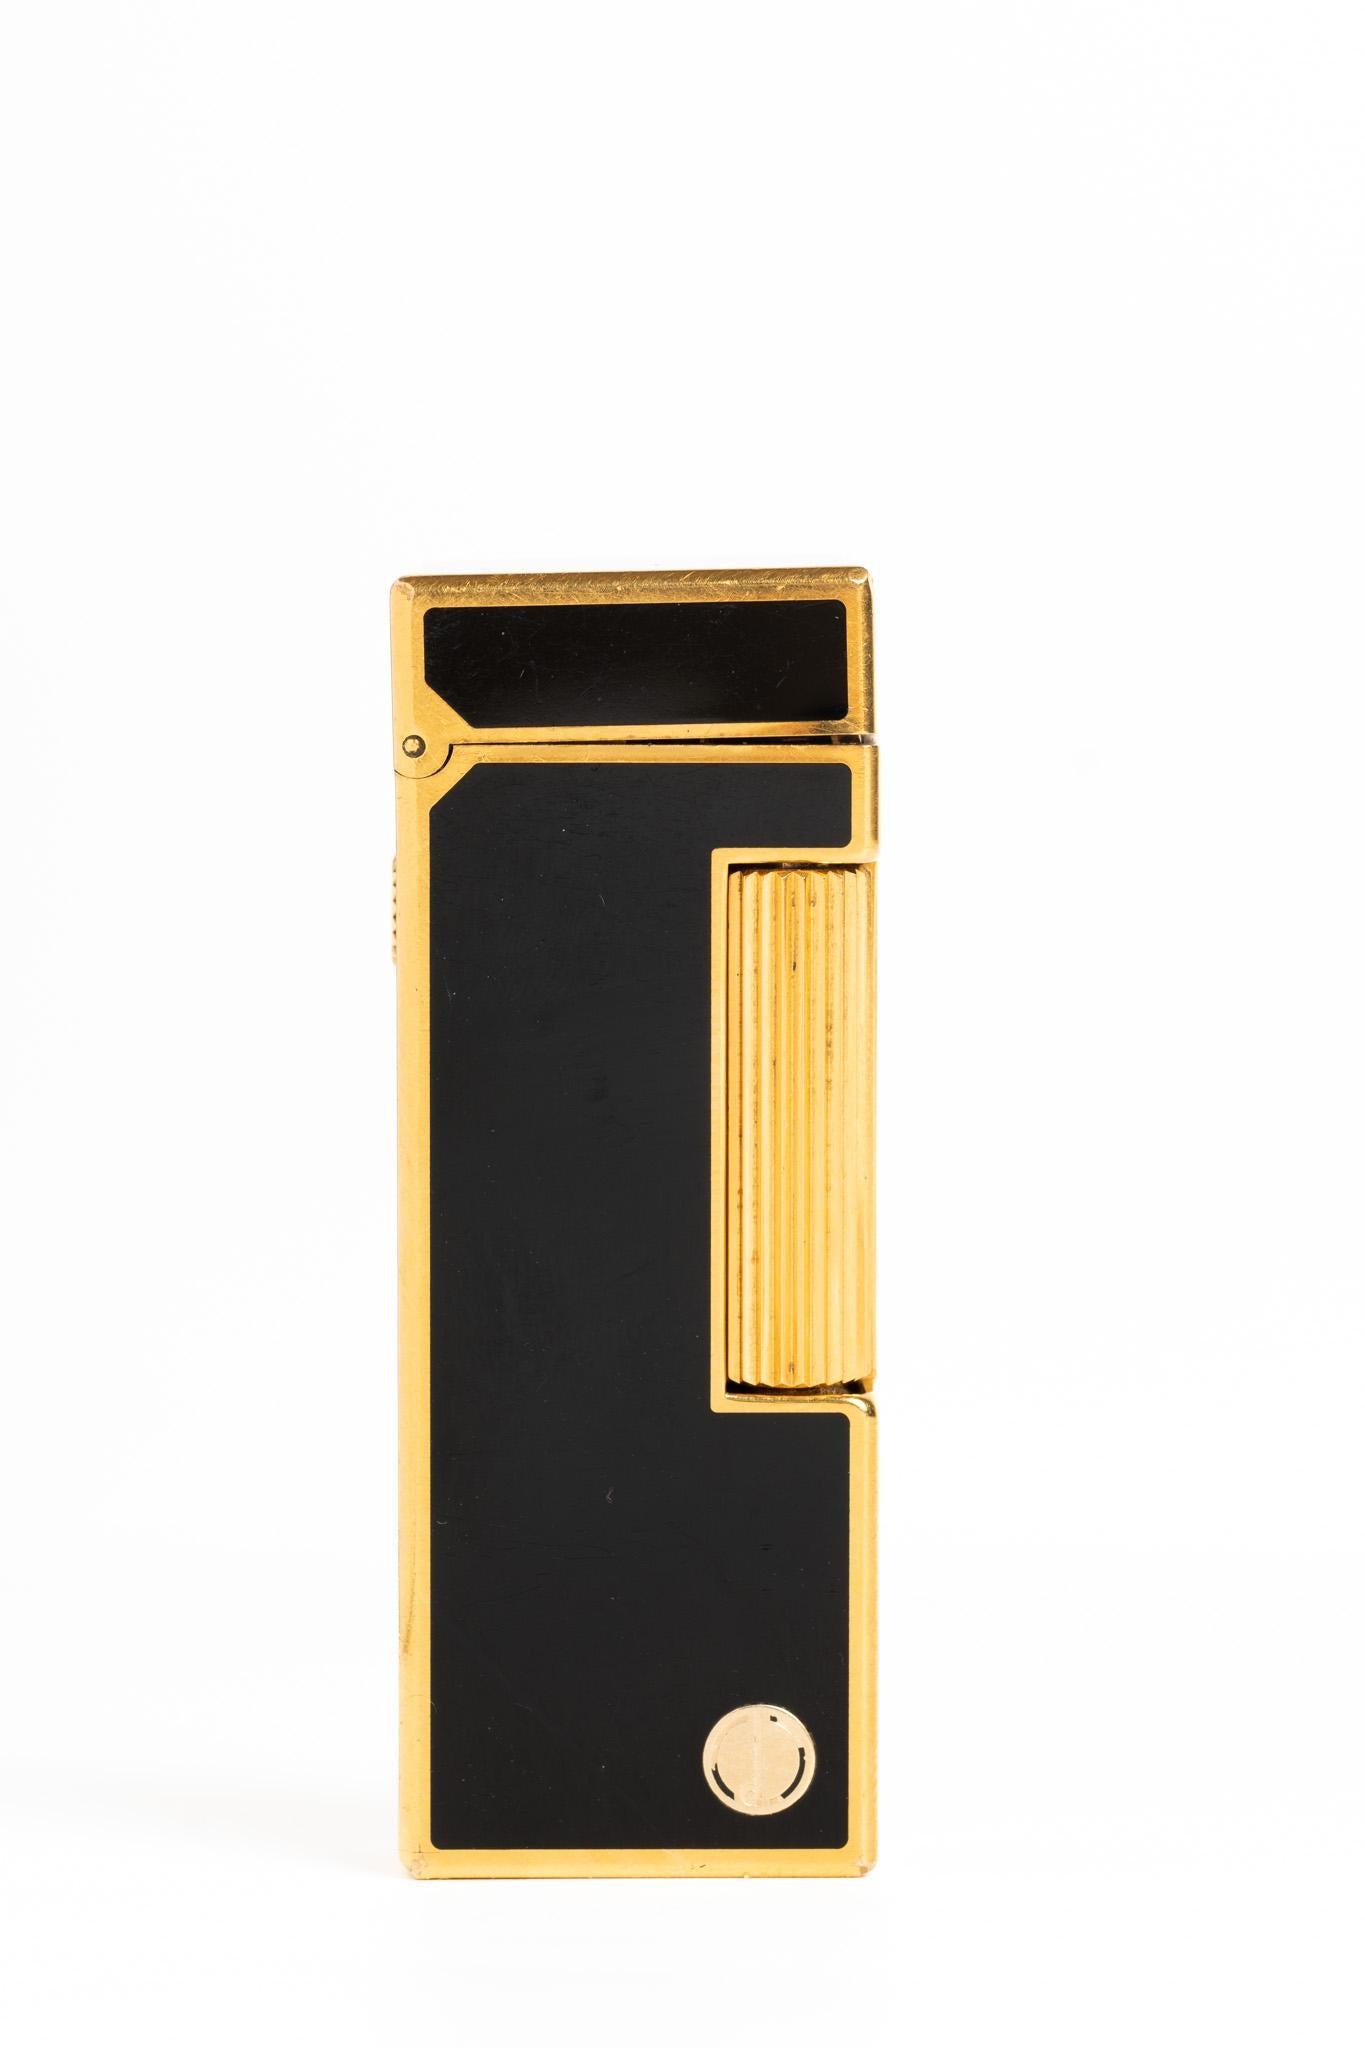 A truly beautiful gold-plated Dunhill lighter with very elegant and luxurious Chinese black lacquer. The lighter is in good vintage condition; The lighter is stamped on the base: 'Dunhill', 'SWISS MADE', serial number '69480'. The lighter is in